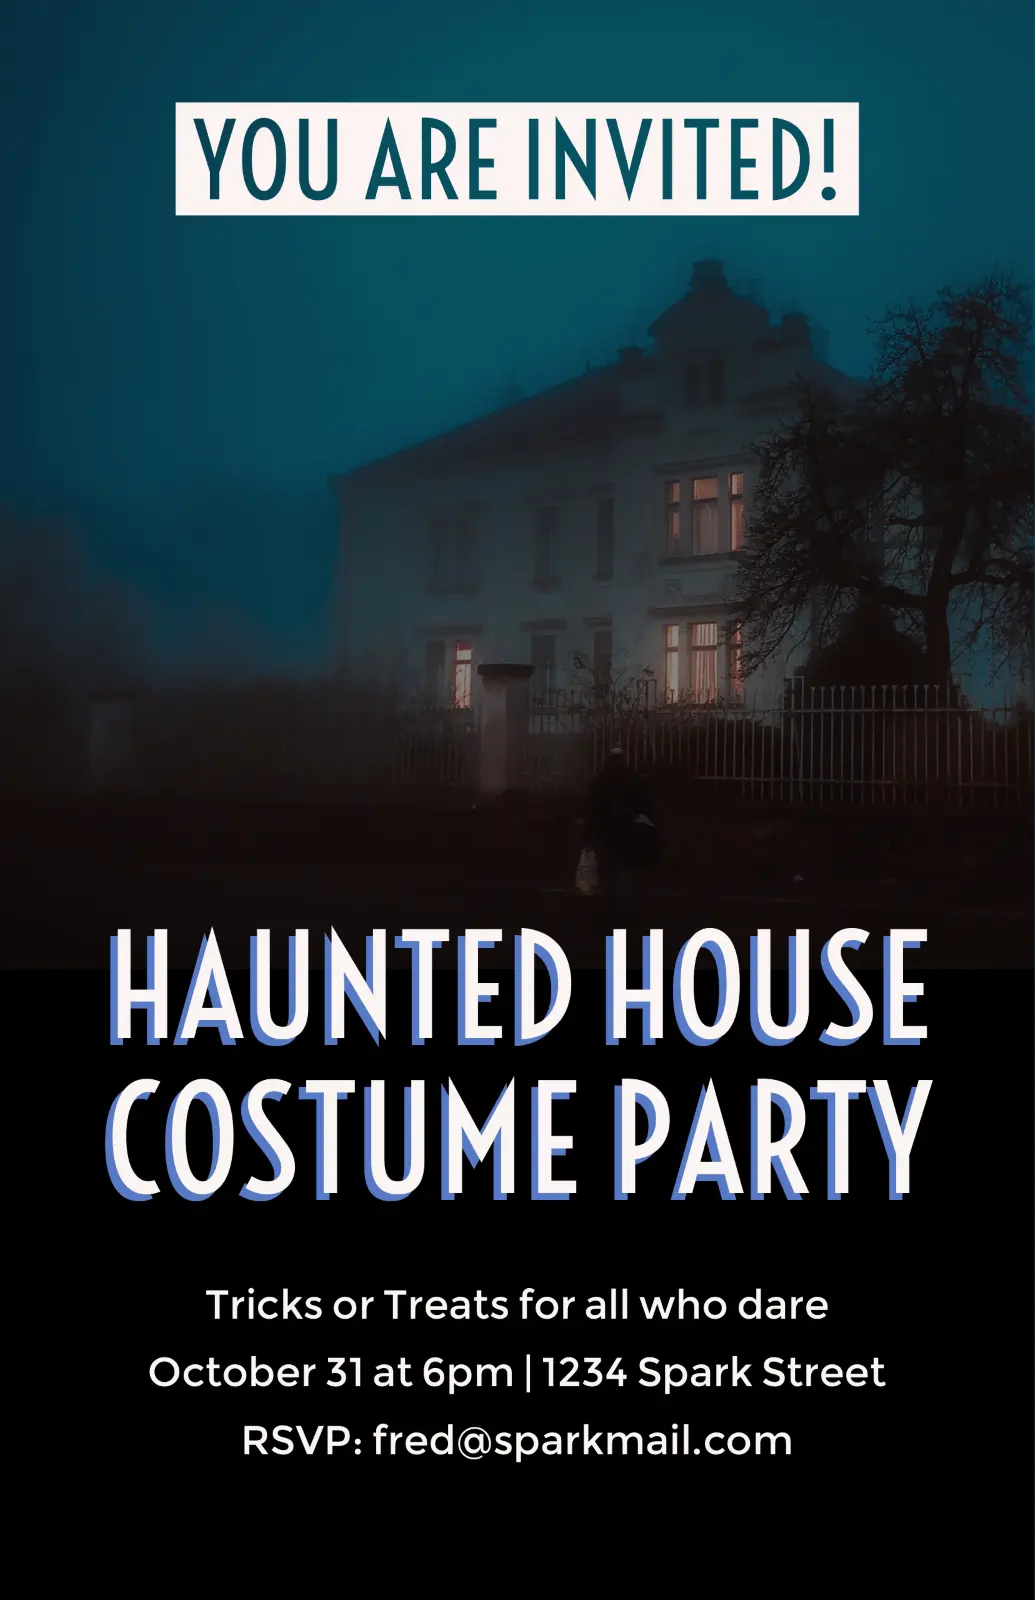 Spooky Mysterious Halloween Party Poster Flyer